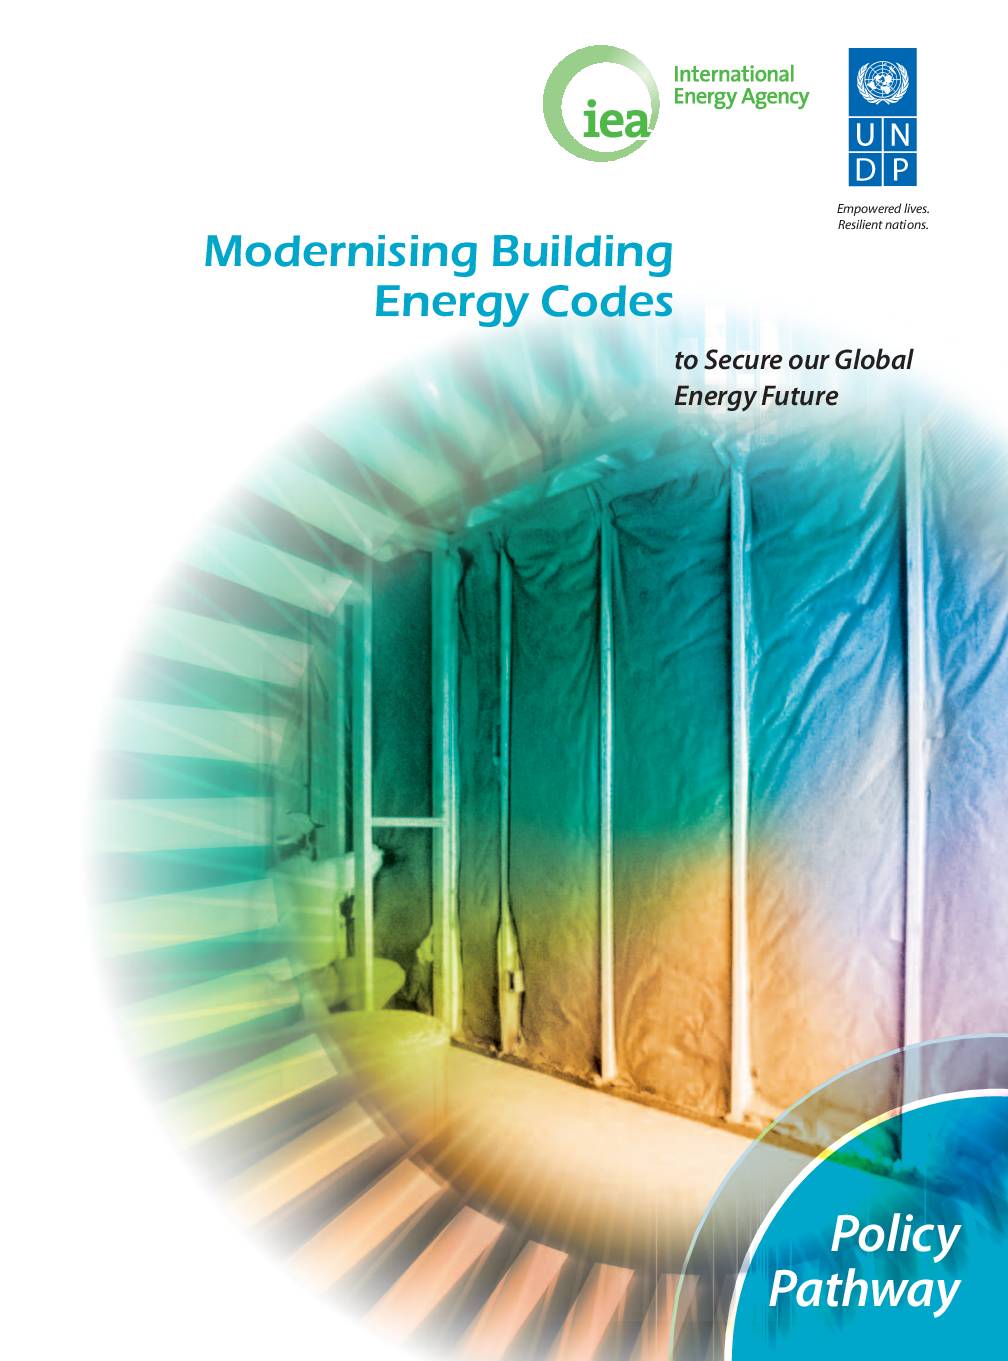 Modernising Building Energy Codes to Secure our Global Energy Future